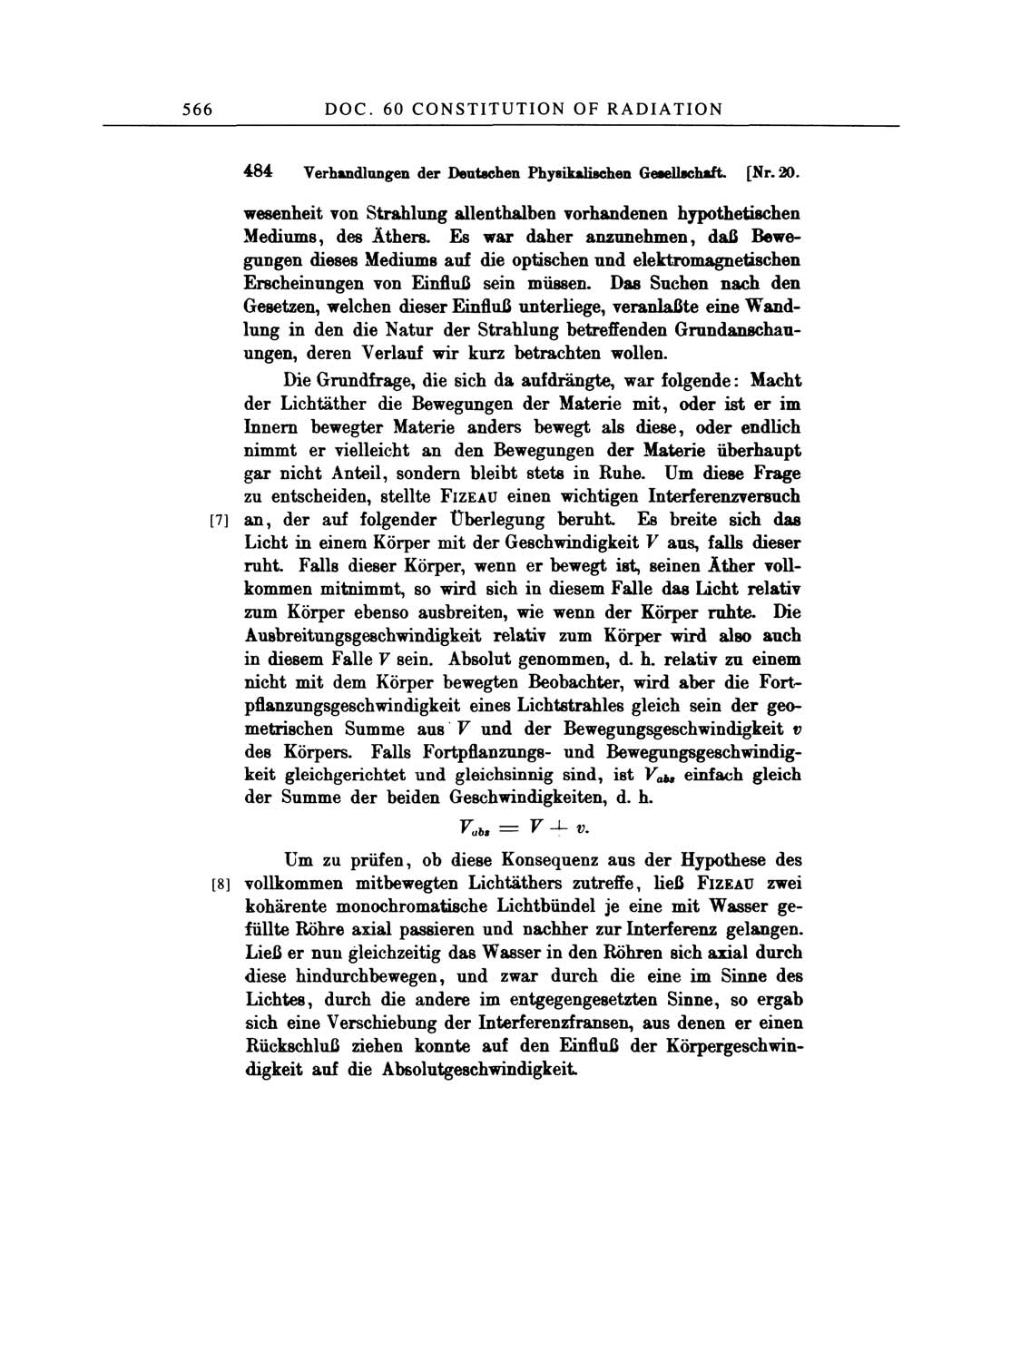 Volume 2: The Swiss Years: Writings, 1900-1909 page 566